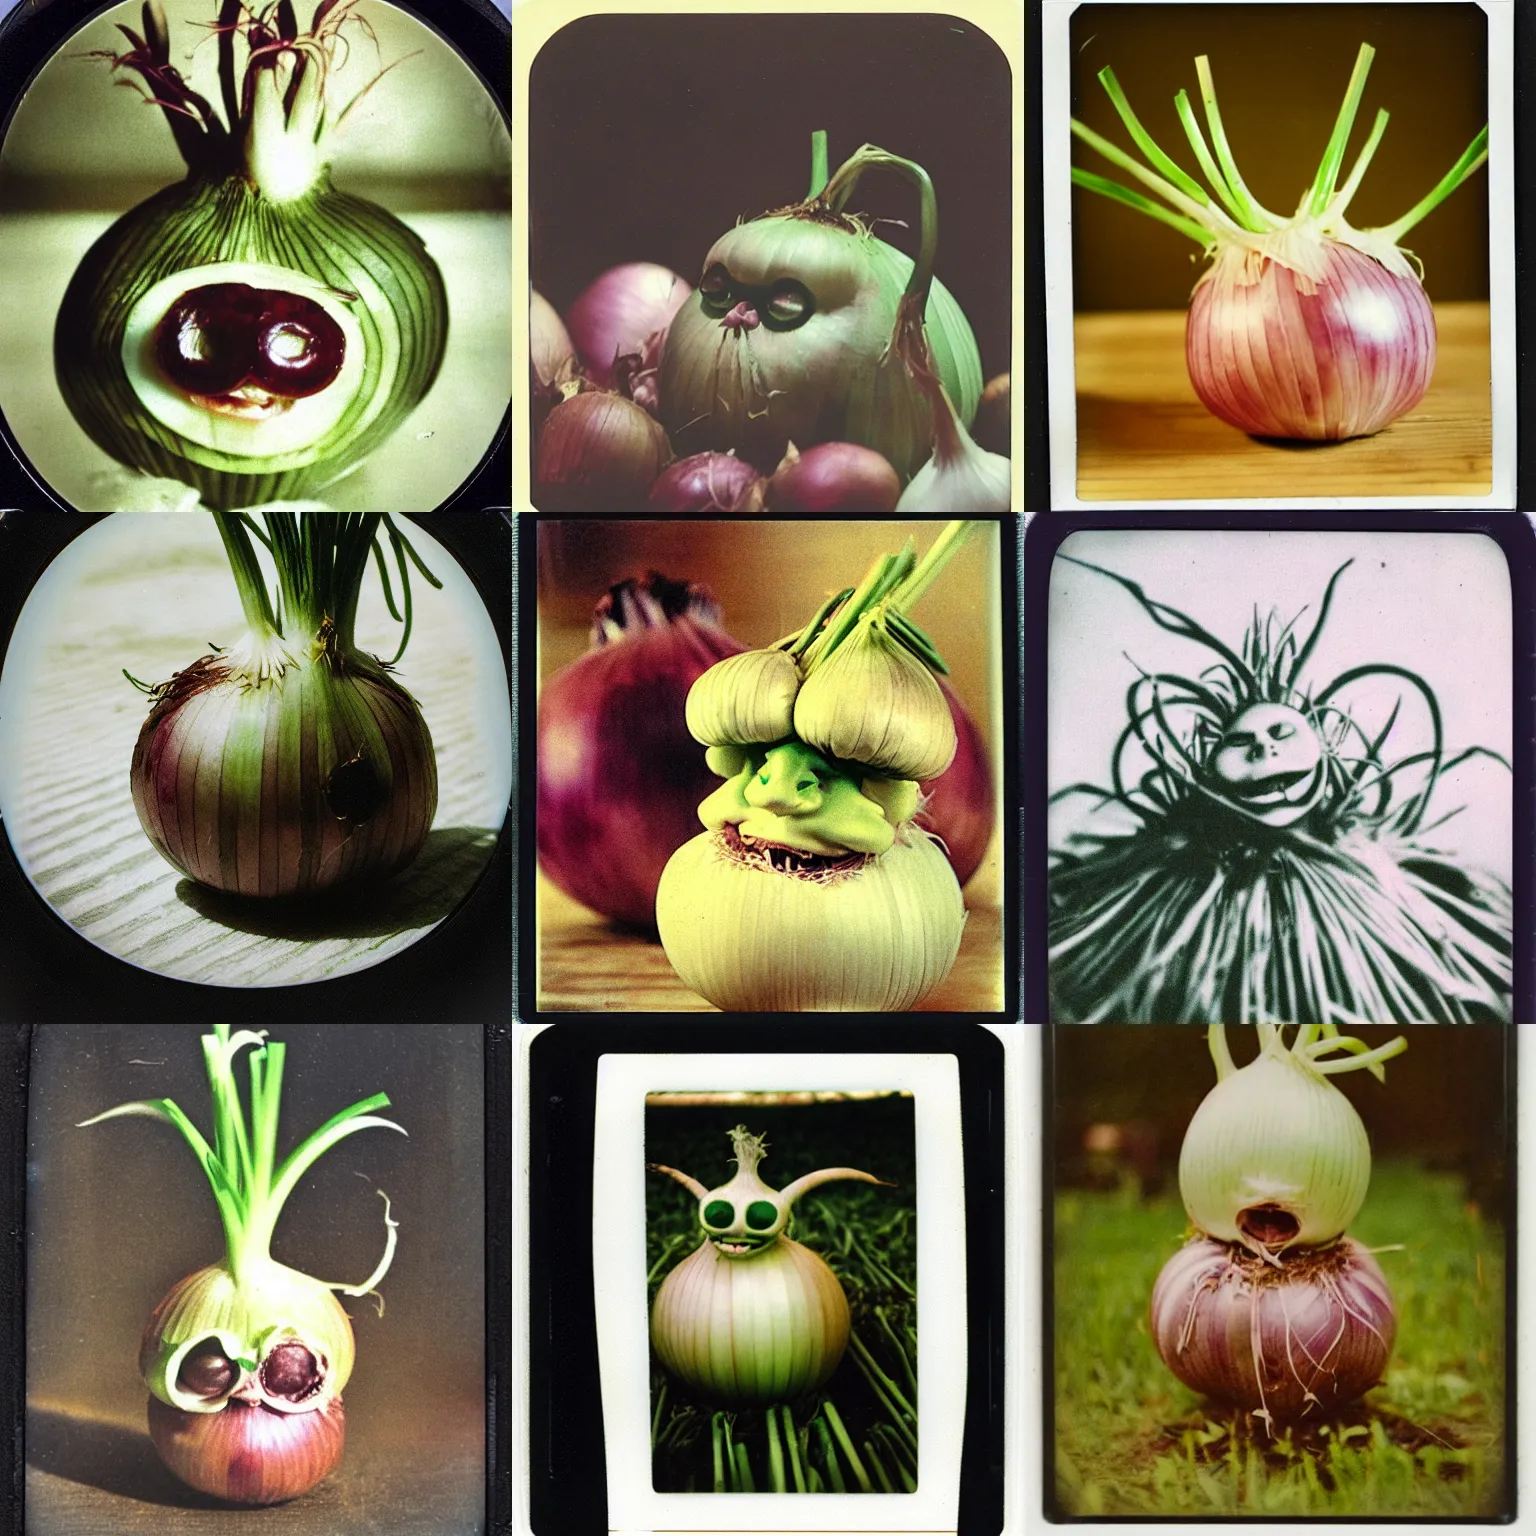 Prompt: vintage polaroid photo of onion demon, demon onion hybrid, surrounded by onions and flesh